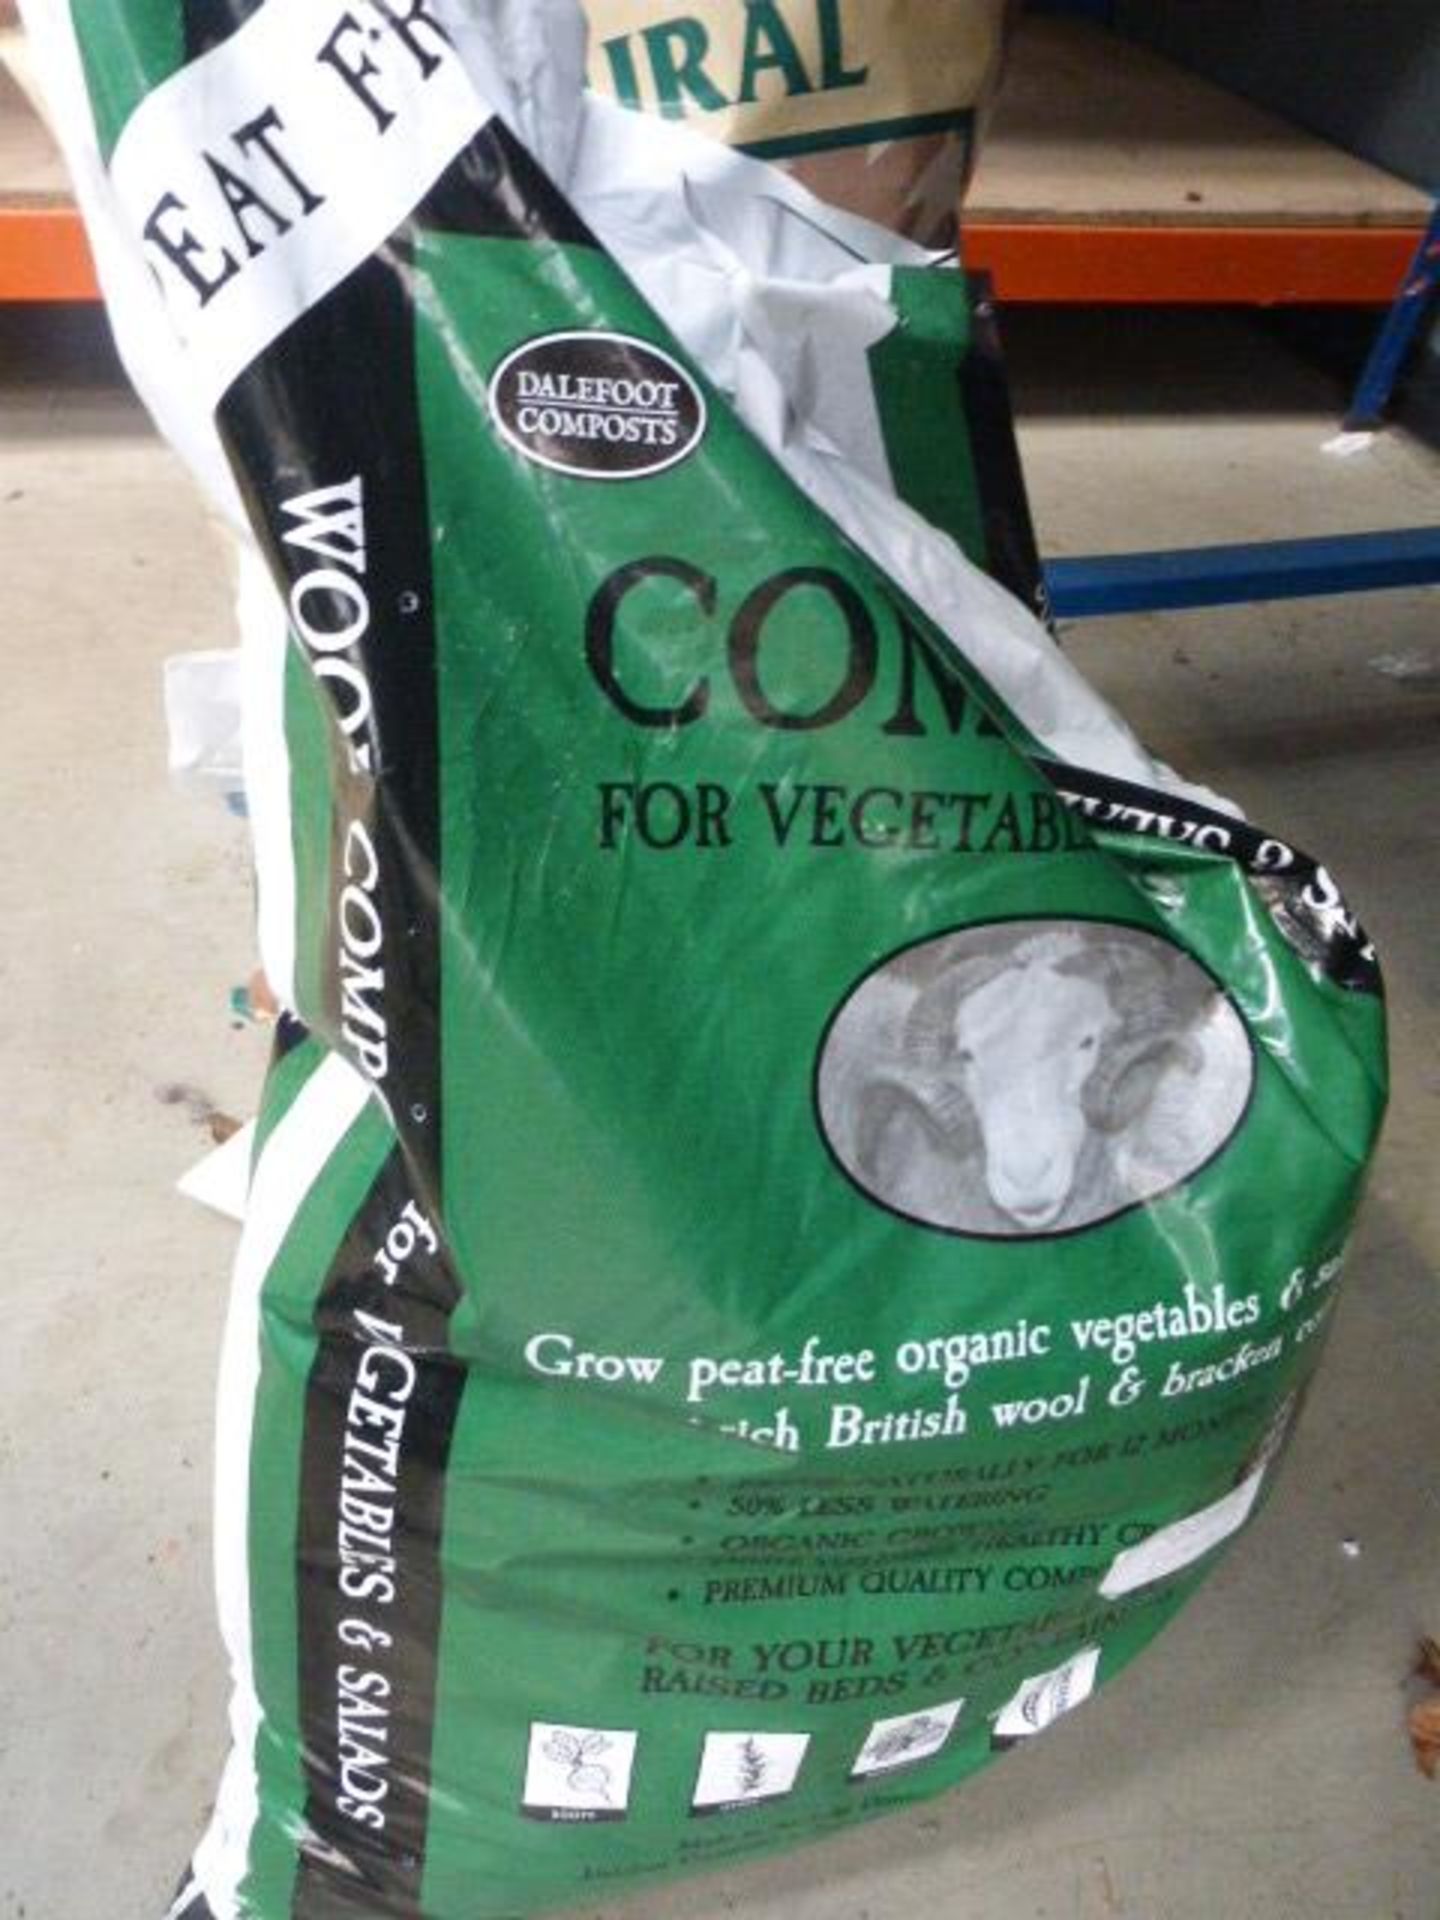 Bag of compost, bag of rock salt and a bag of natural cocoa - Image 2 of 4